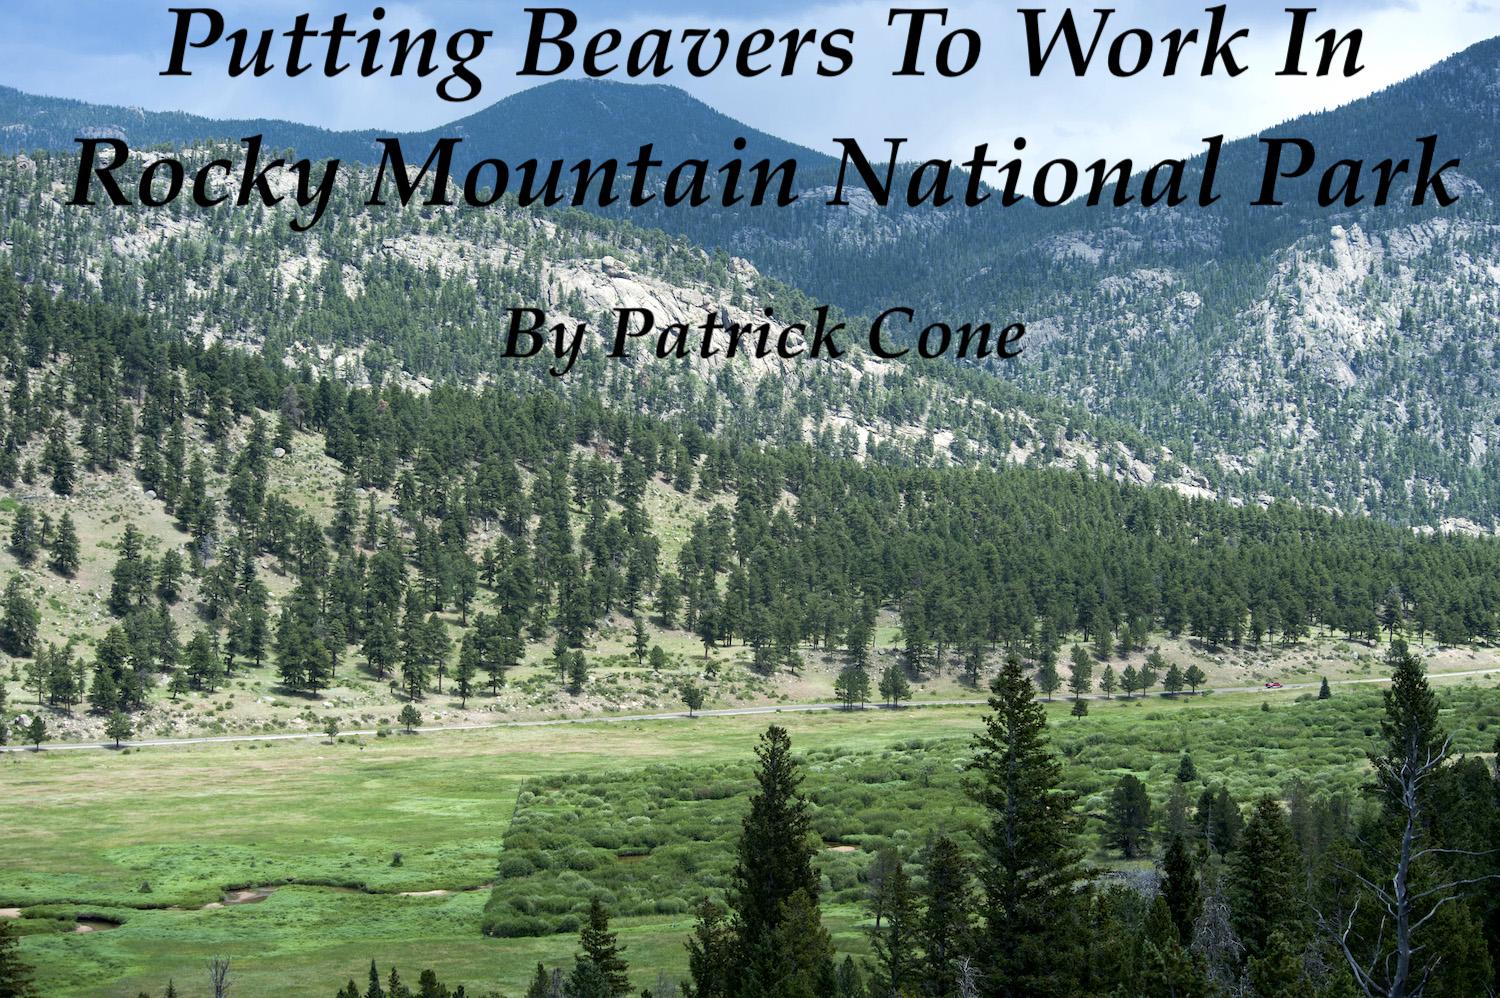 Beavers are helping with ecosystem restoration at Rocky Mountain National Park/Patrick Cone